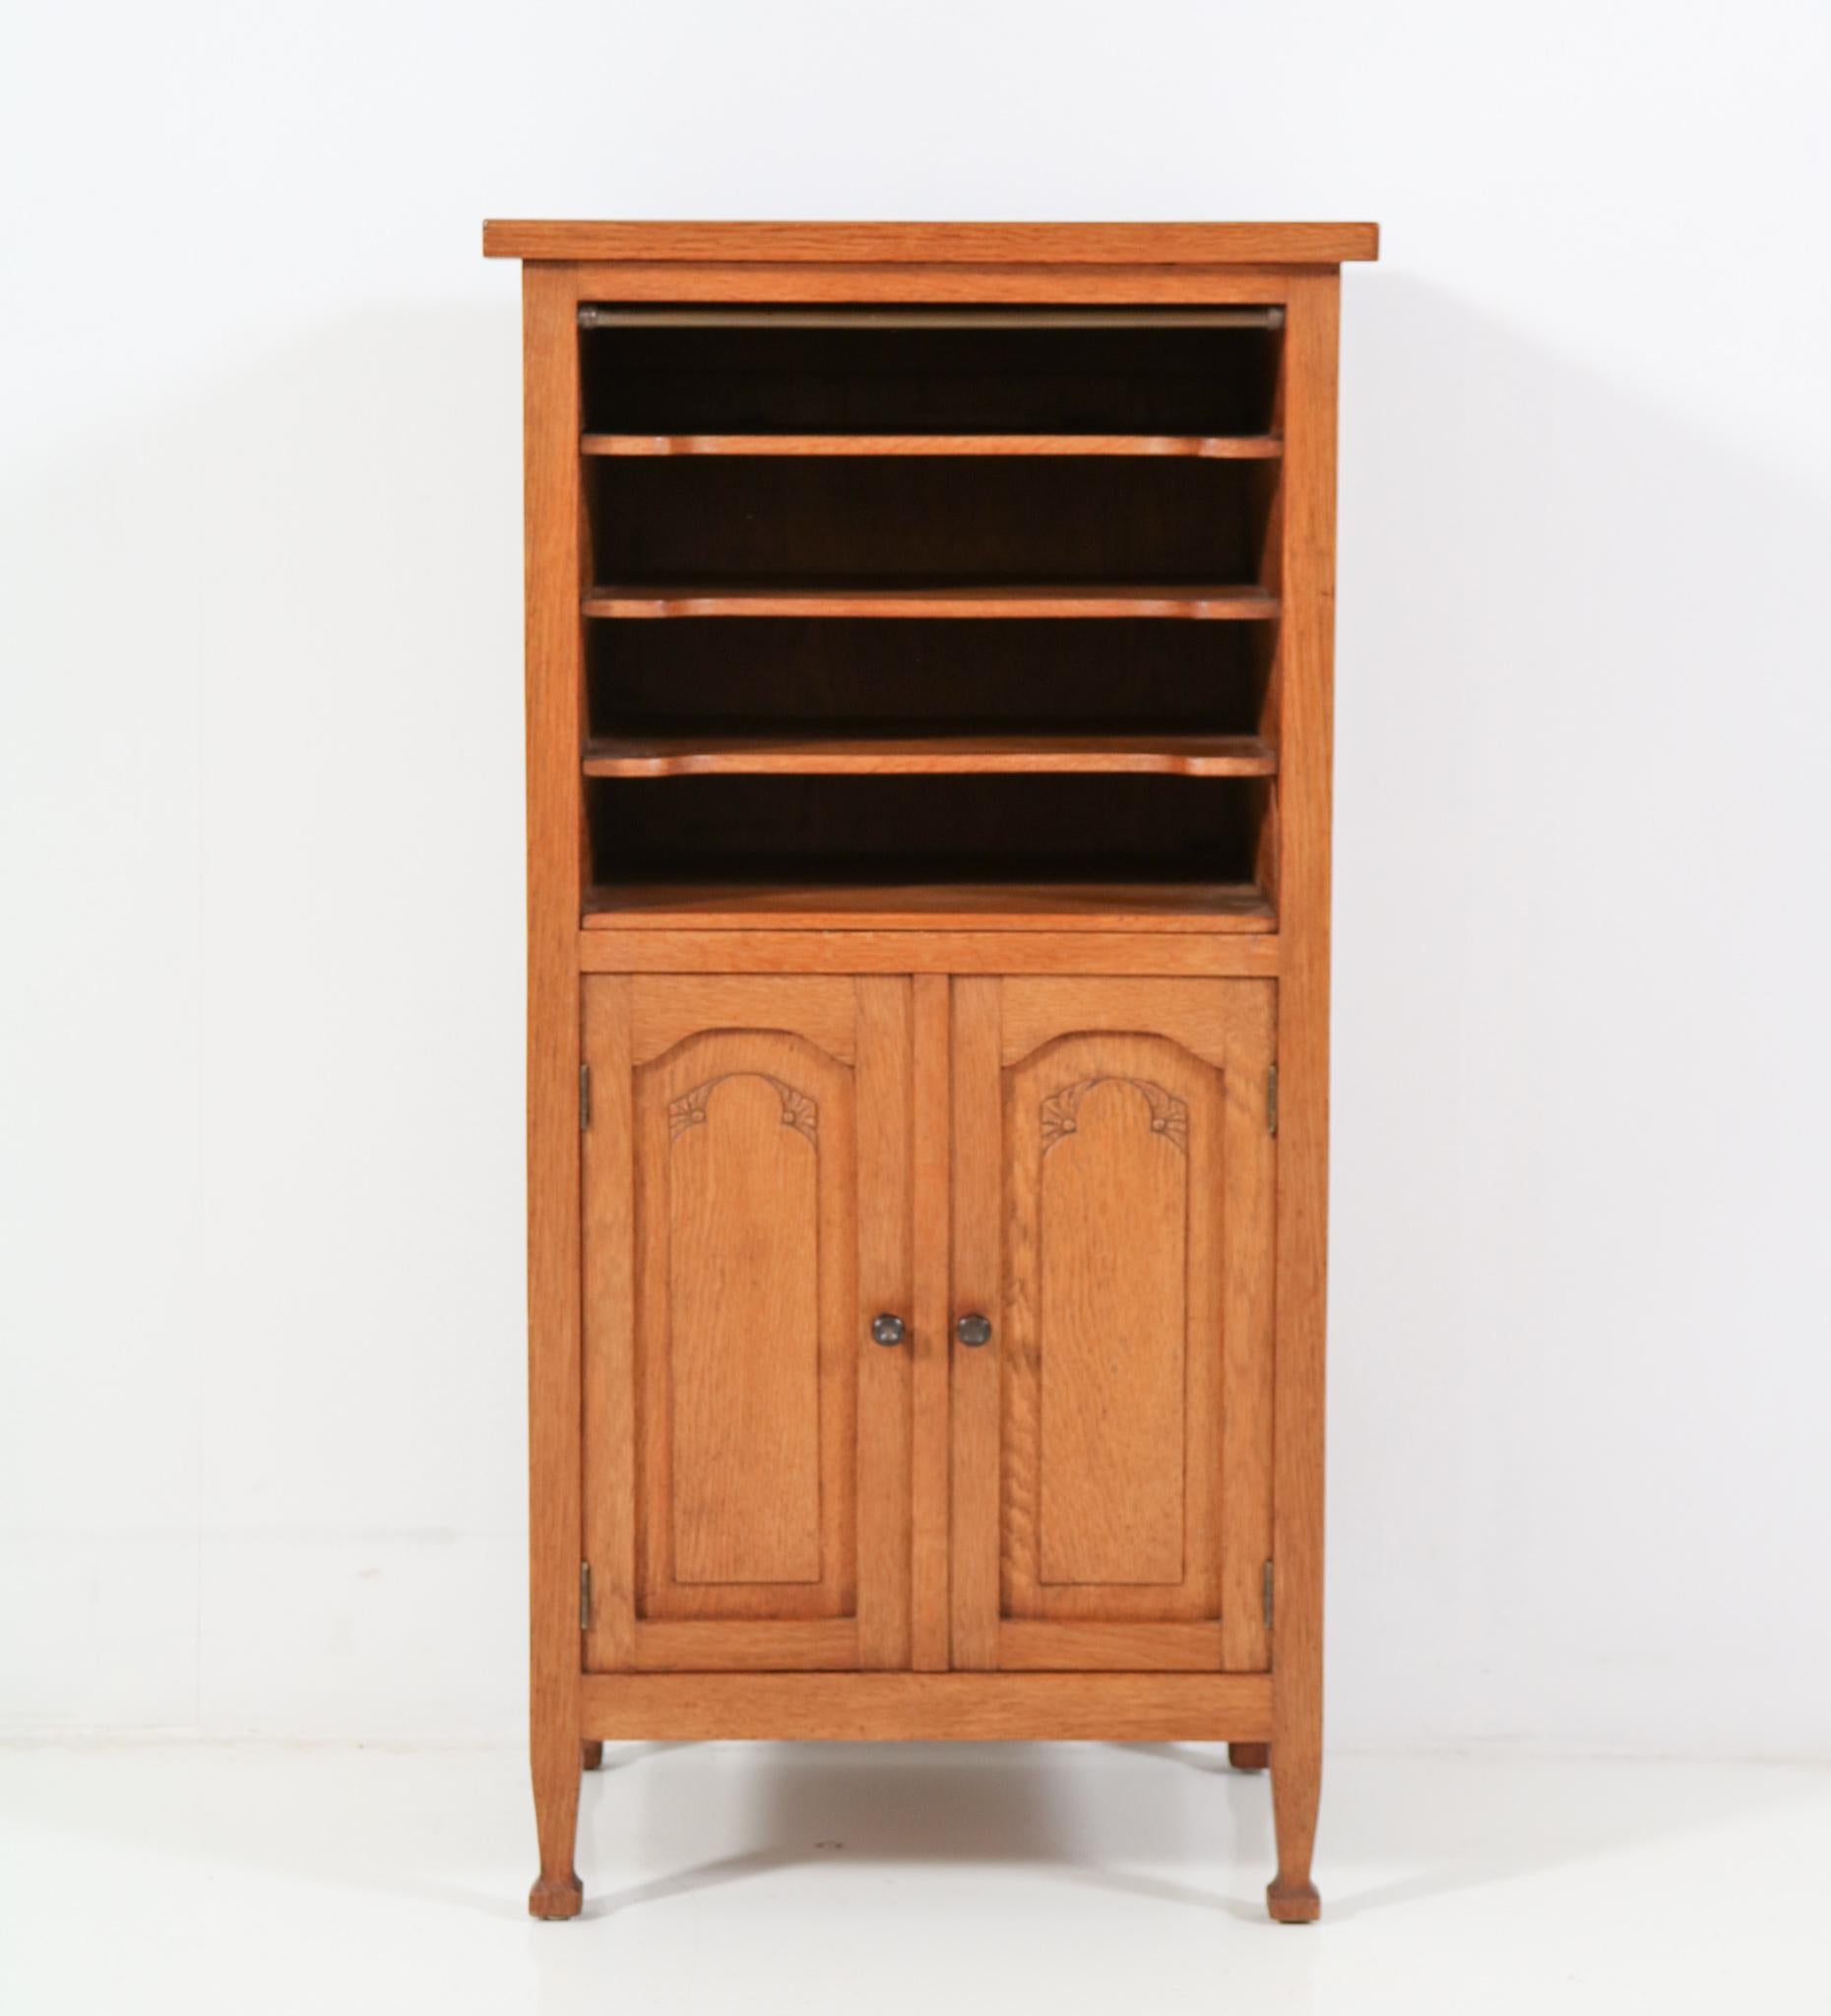 Stunning and rare Art Nouveau Jugendstil cabinet.
Striking Dutch design from the 1900s.
Solid oak with original solid ebony macassar knobs on the doors.
This wonderful Art Nouveau Jugendstil high quality cabinet is in
very good condition with a